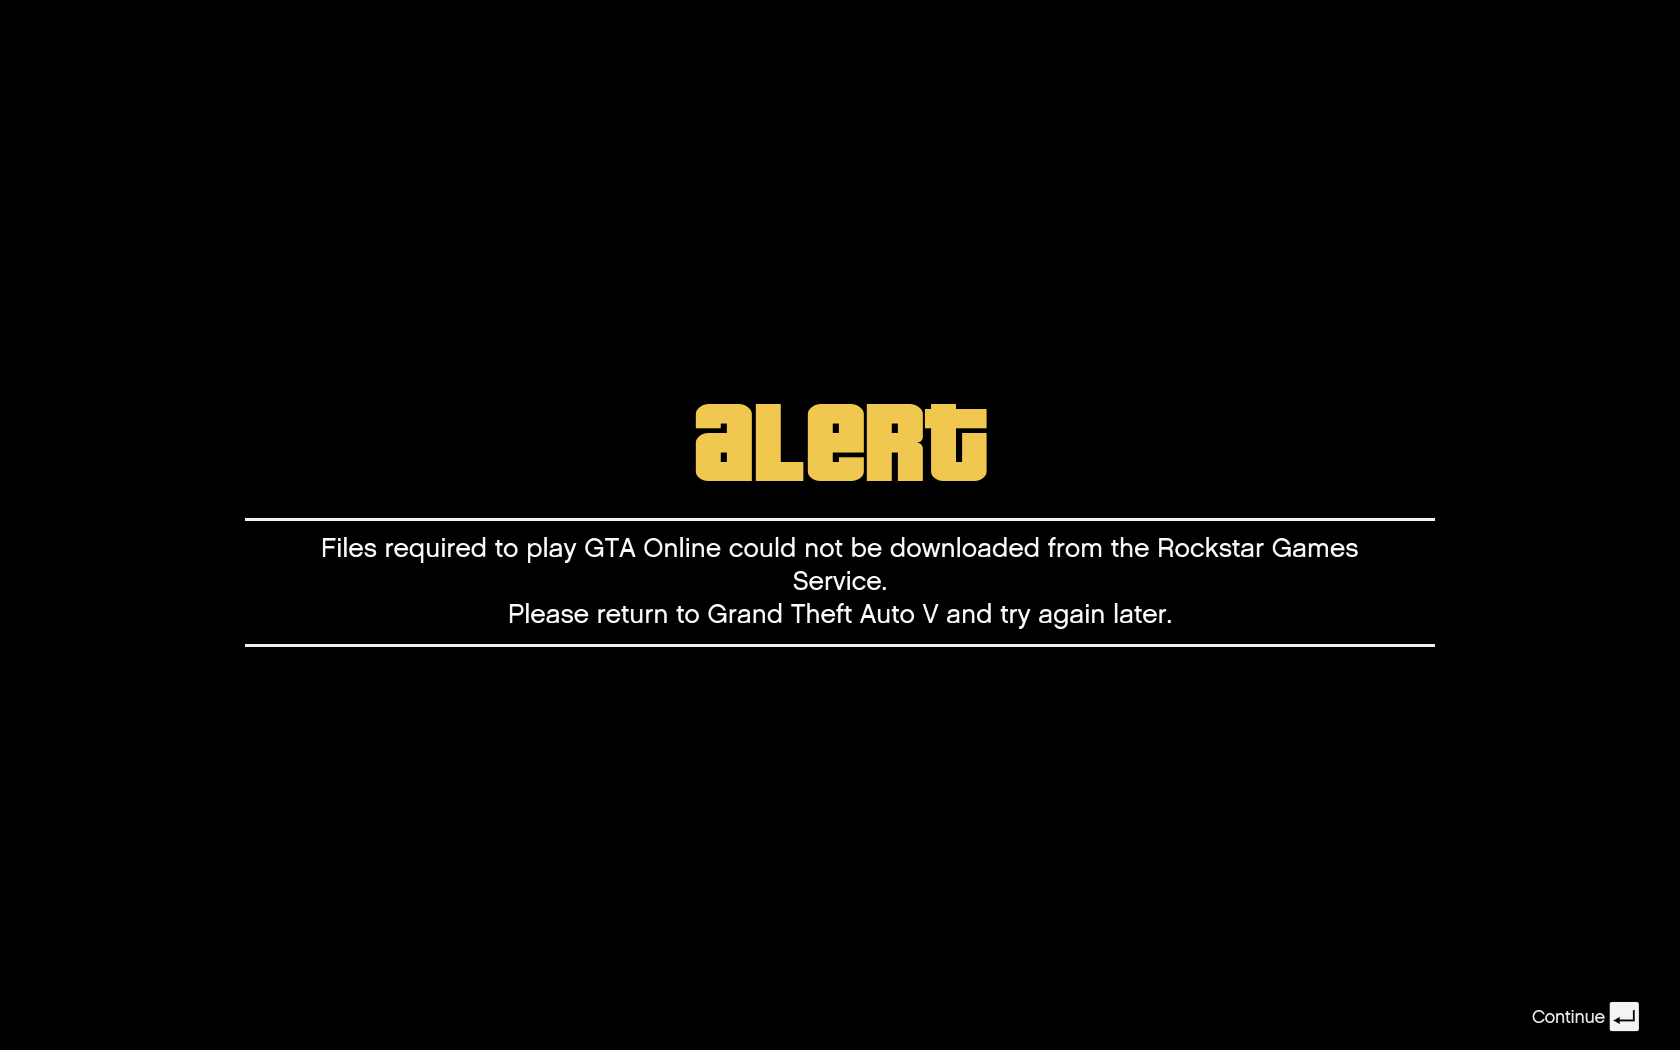 GTA V Online "Files required to play GTA Online could not be downloaded